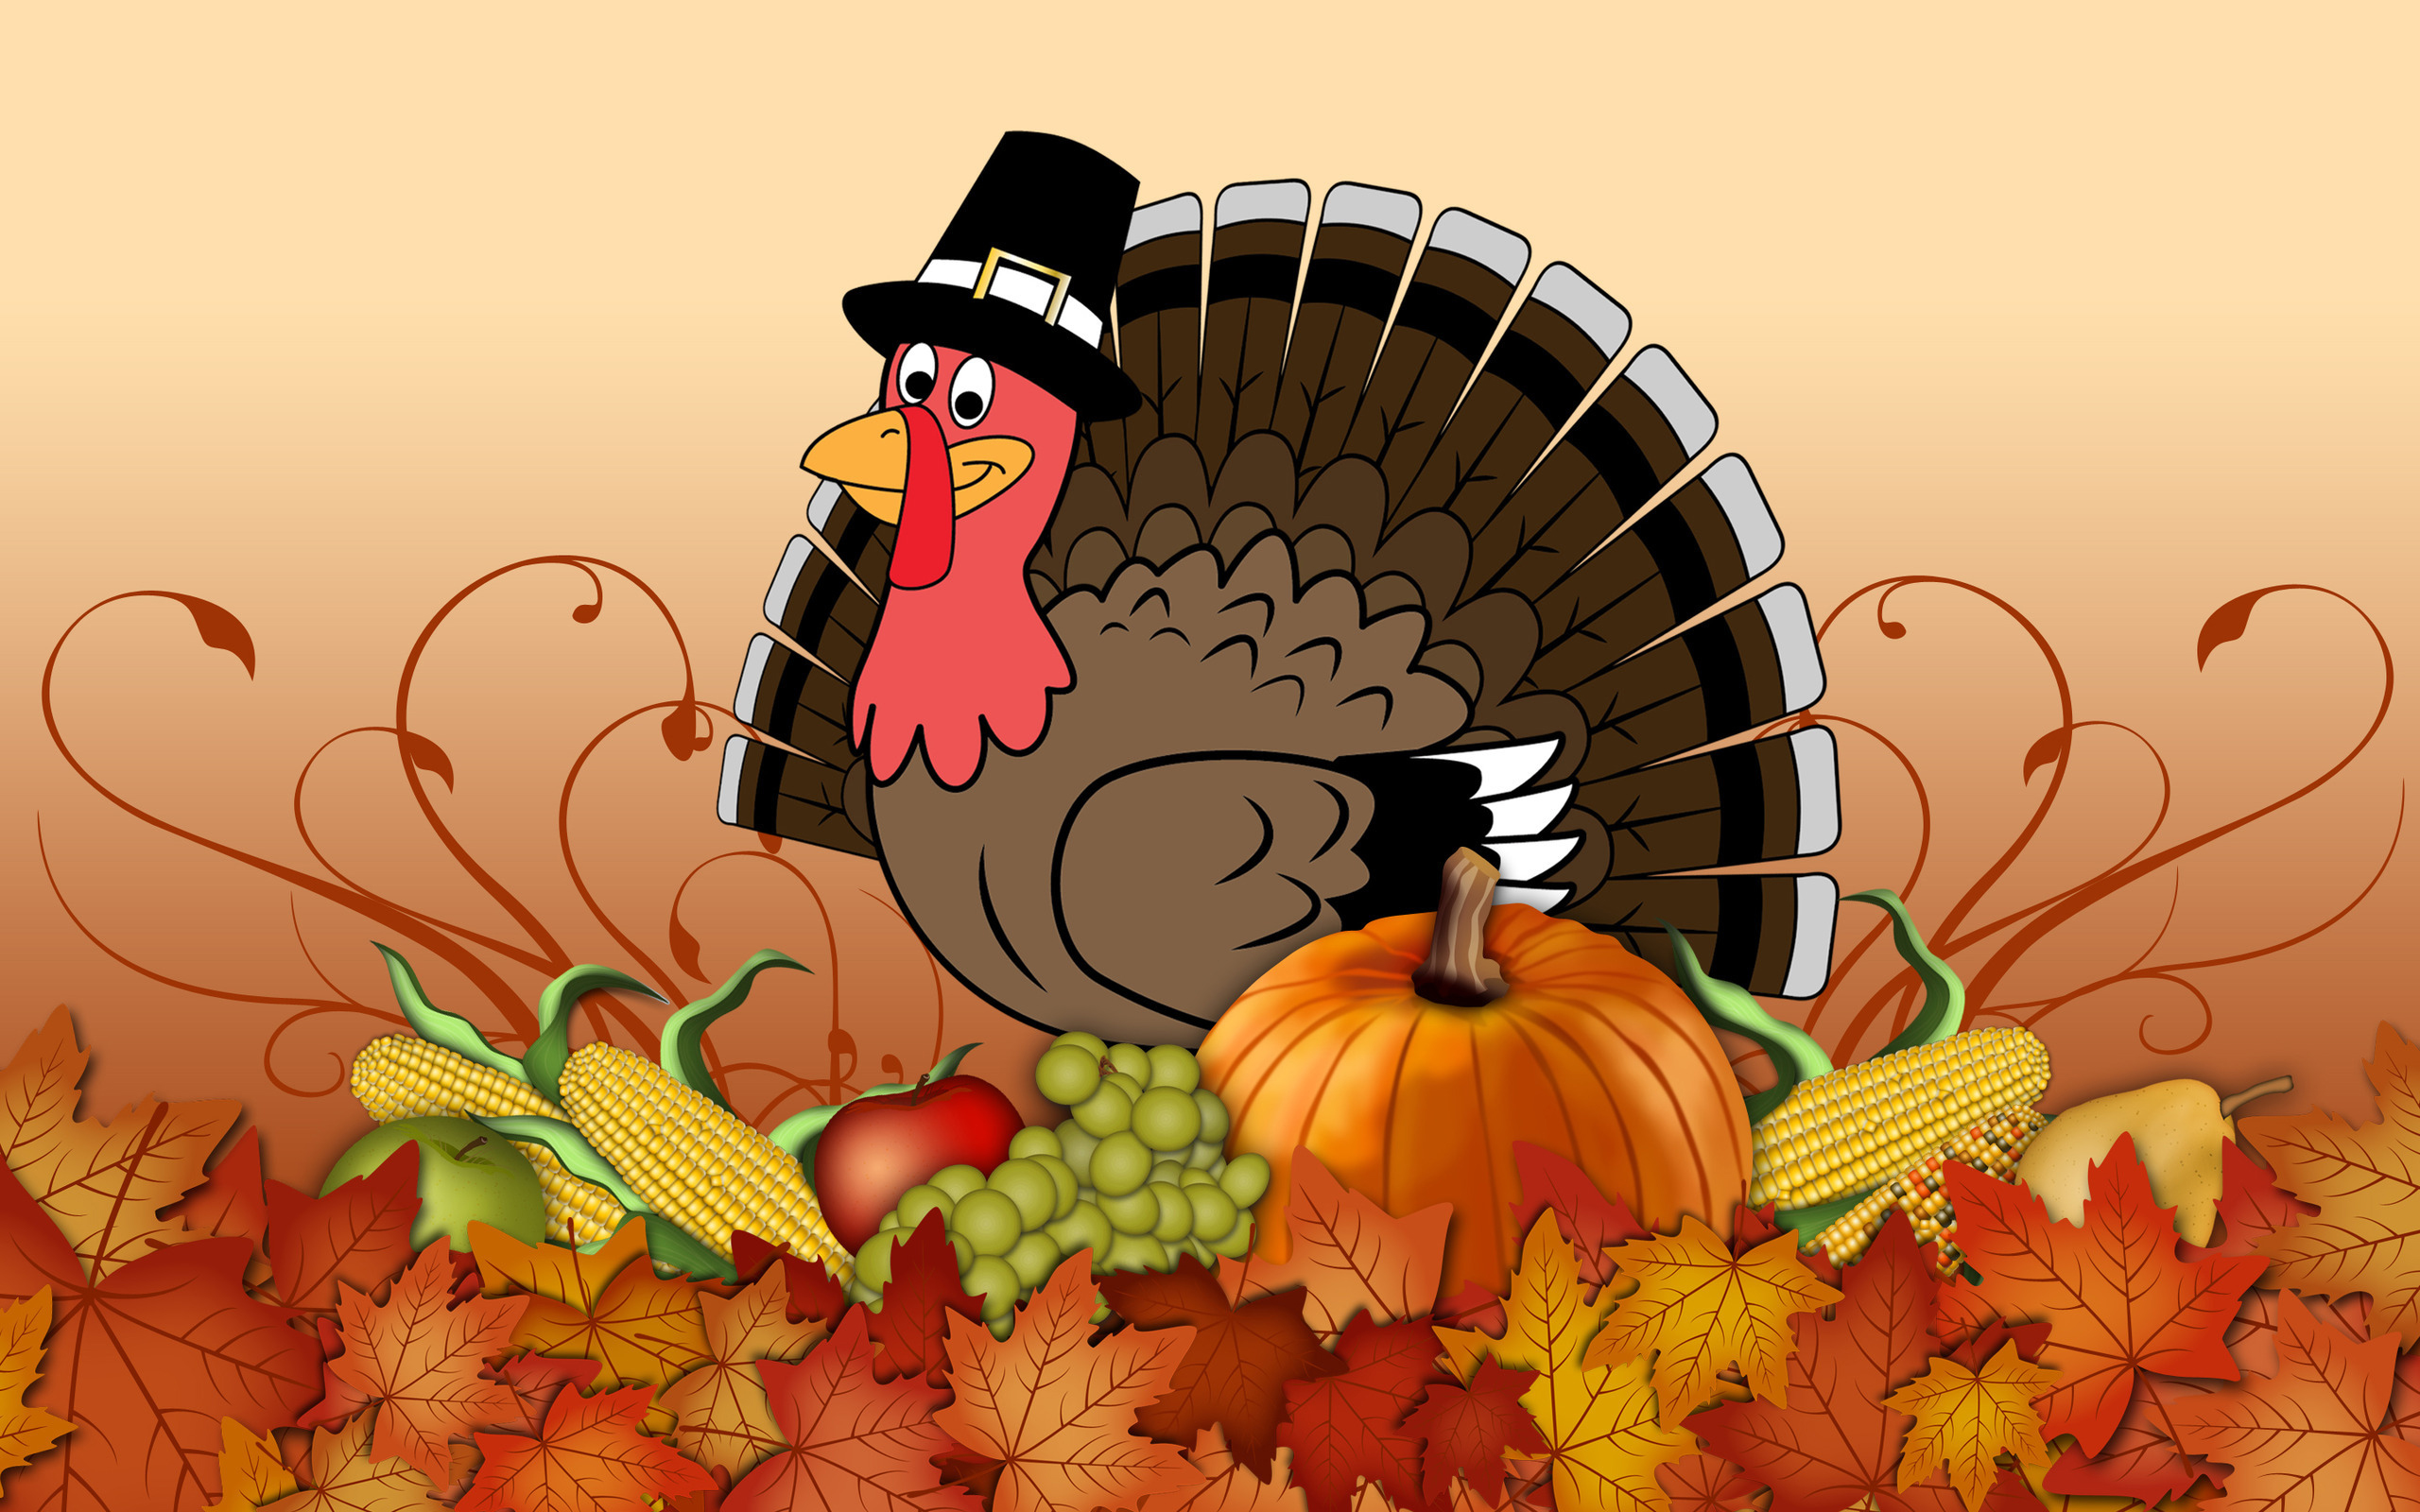 Thanksgiving Background Photos 2016 | Wallpapers, Backgrounds, Images